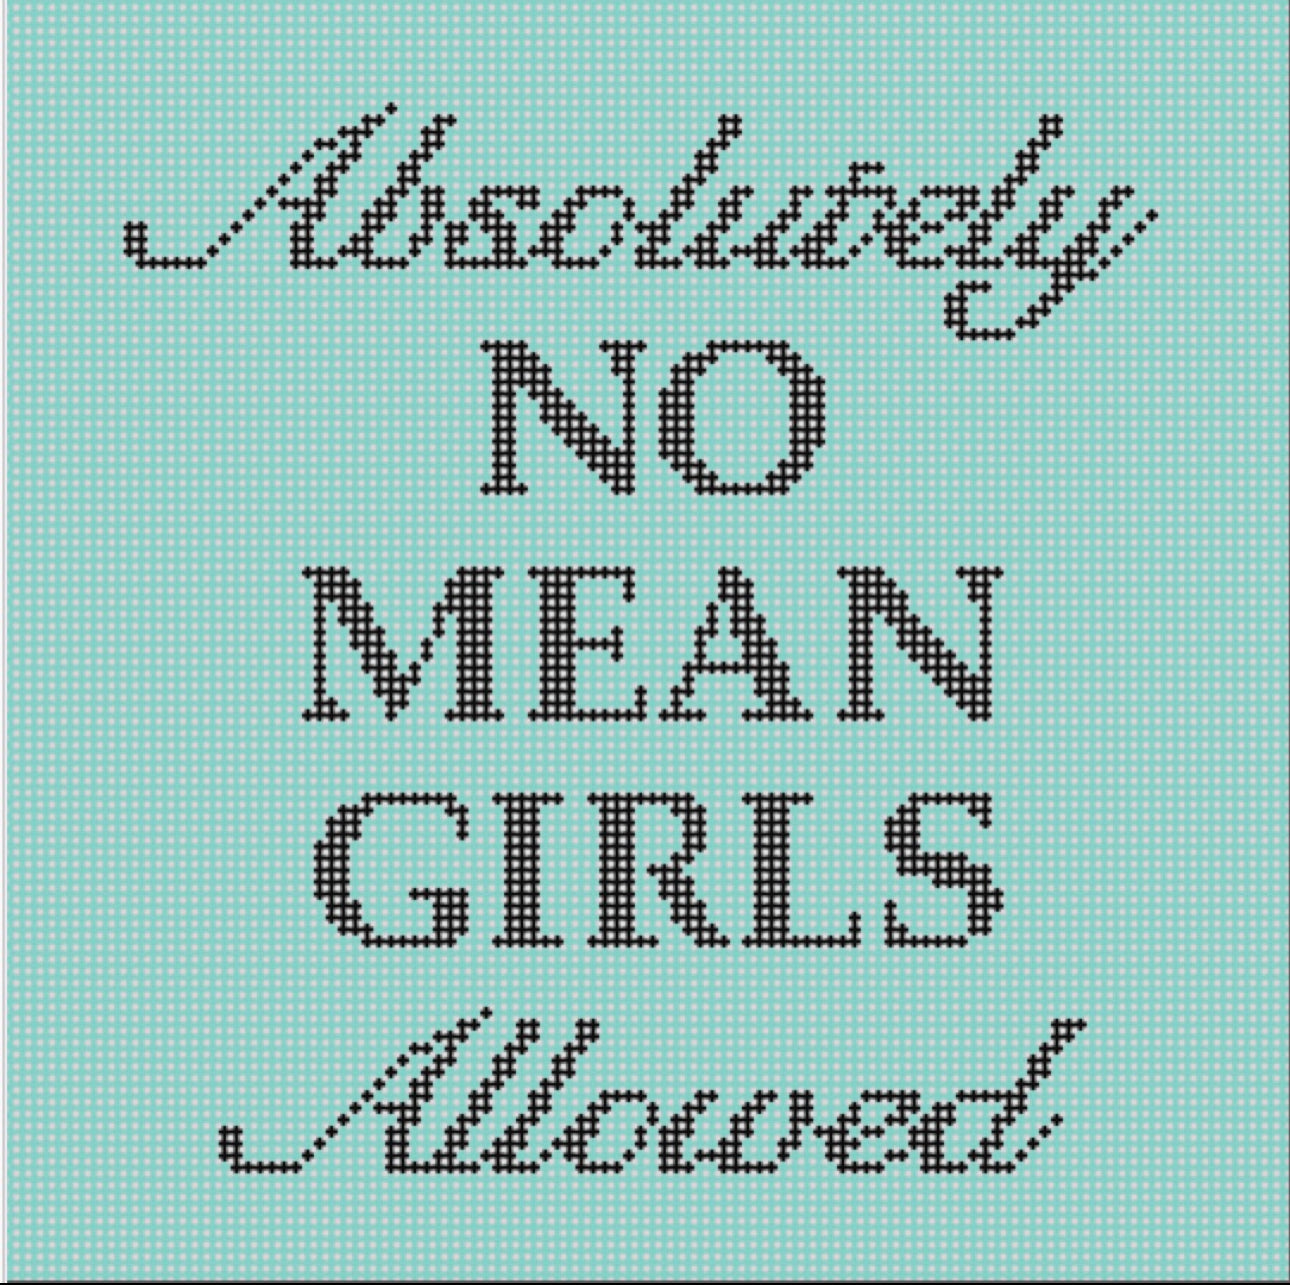 “NO MEAN GIRLS”, 6” square on 18 mesh